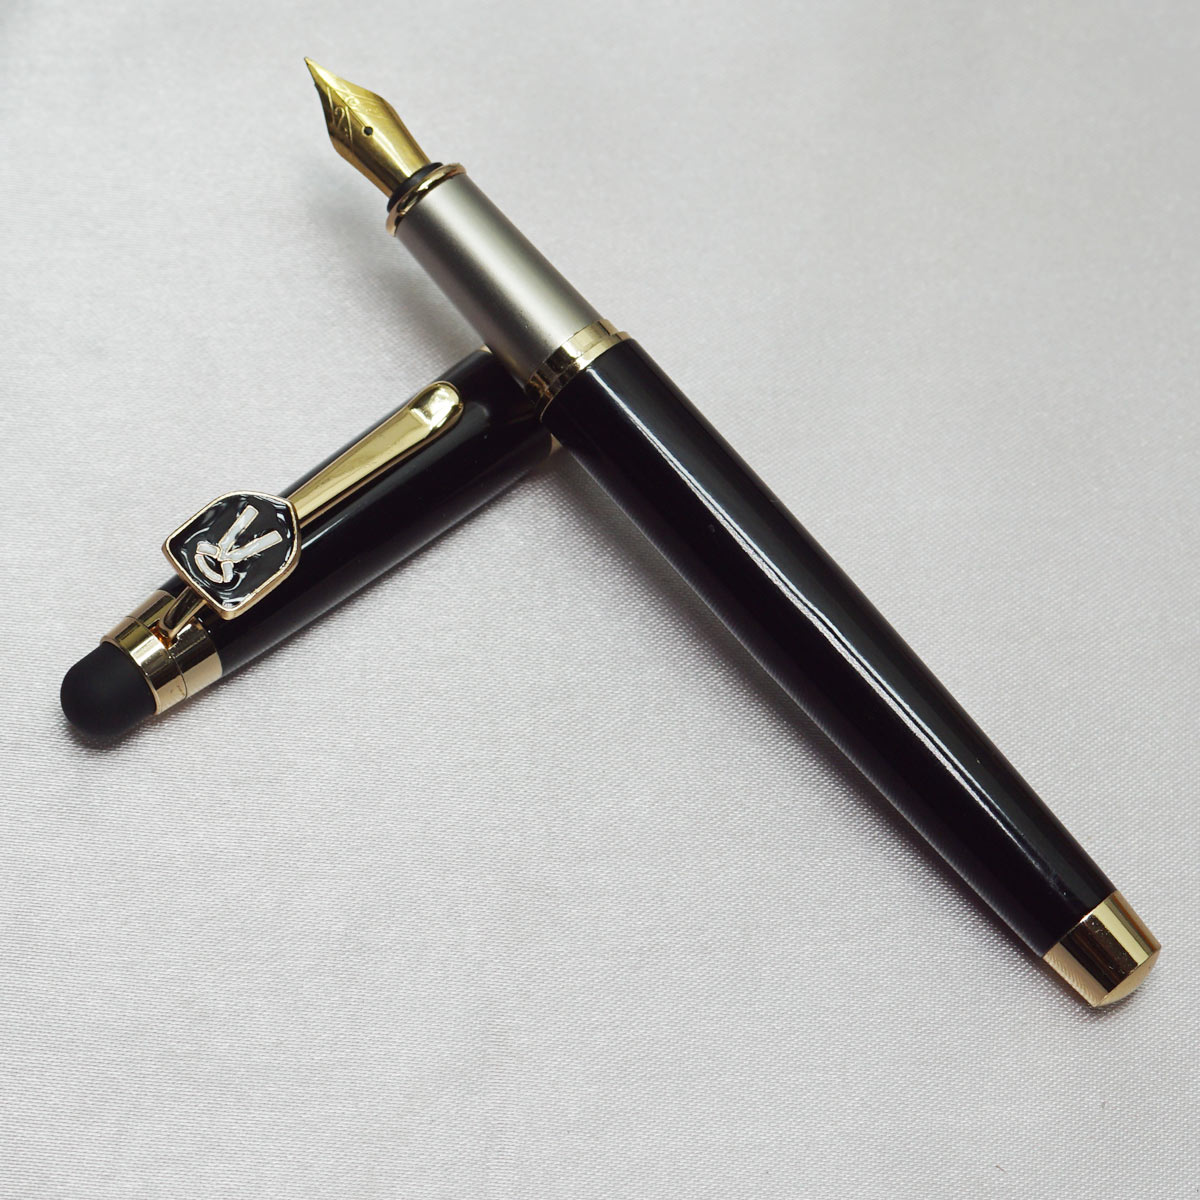 penhose.in Black Color Body With Cap Top On Stylus and Gold Trims Advocate Symbol On Clip Fine Nib Converter Type Fountain Pen SKU 22561